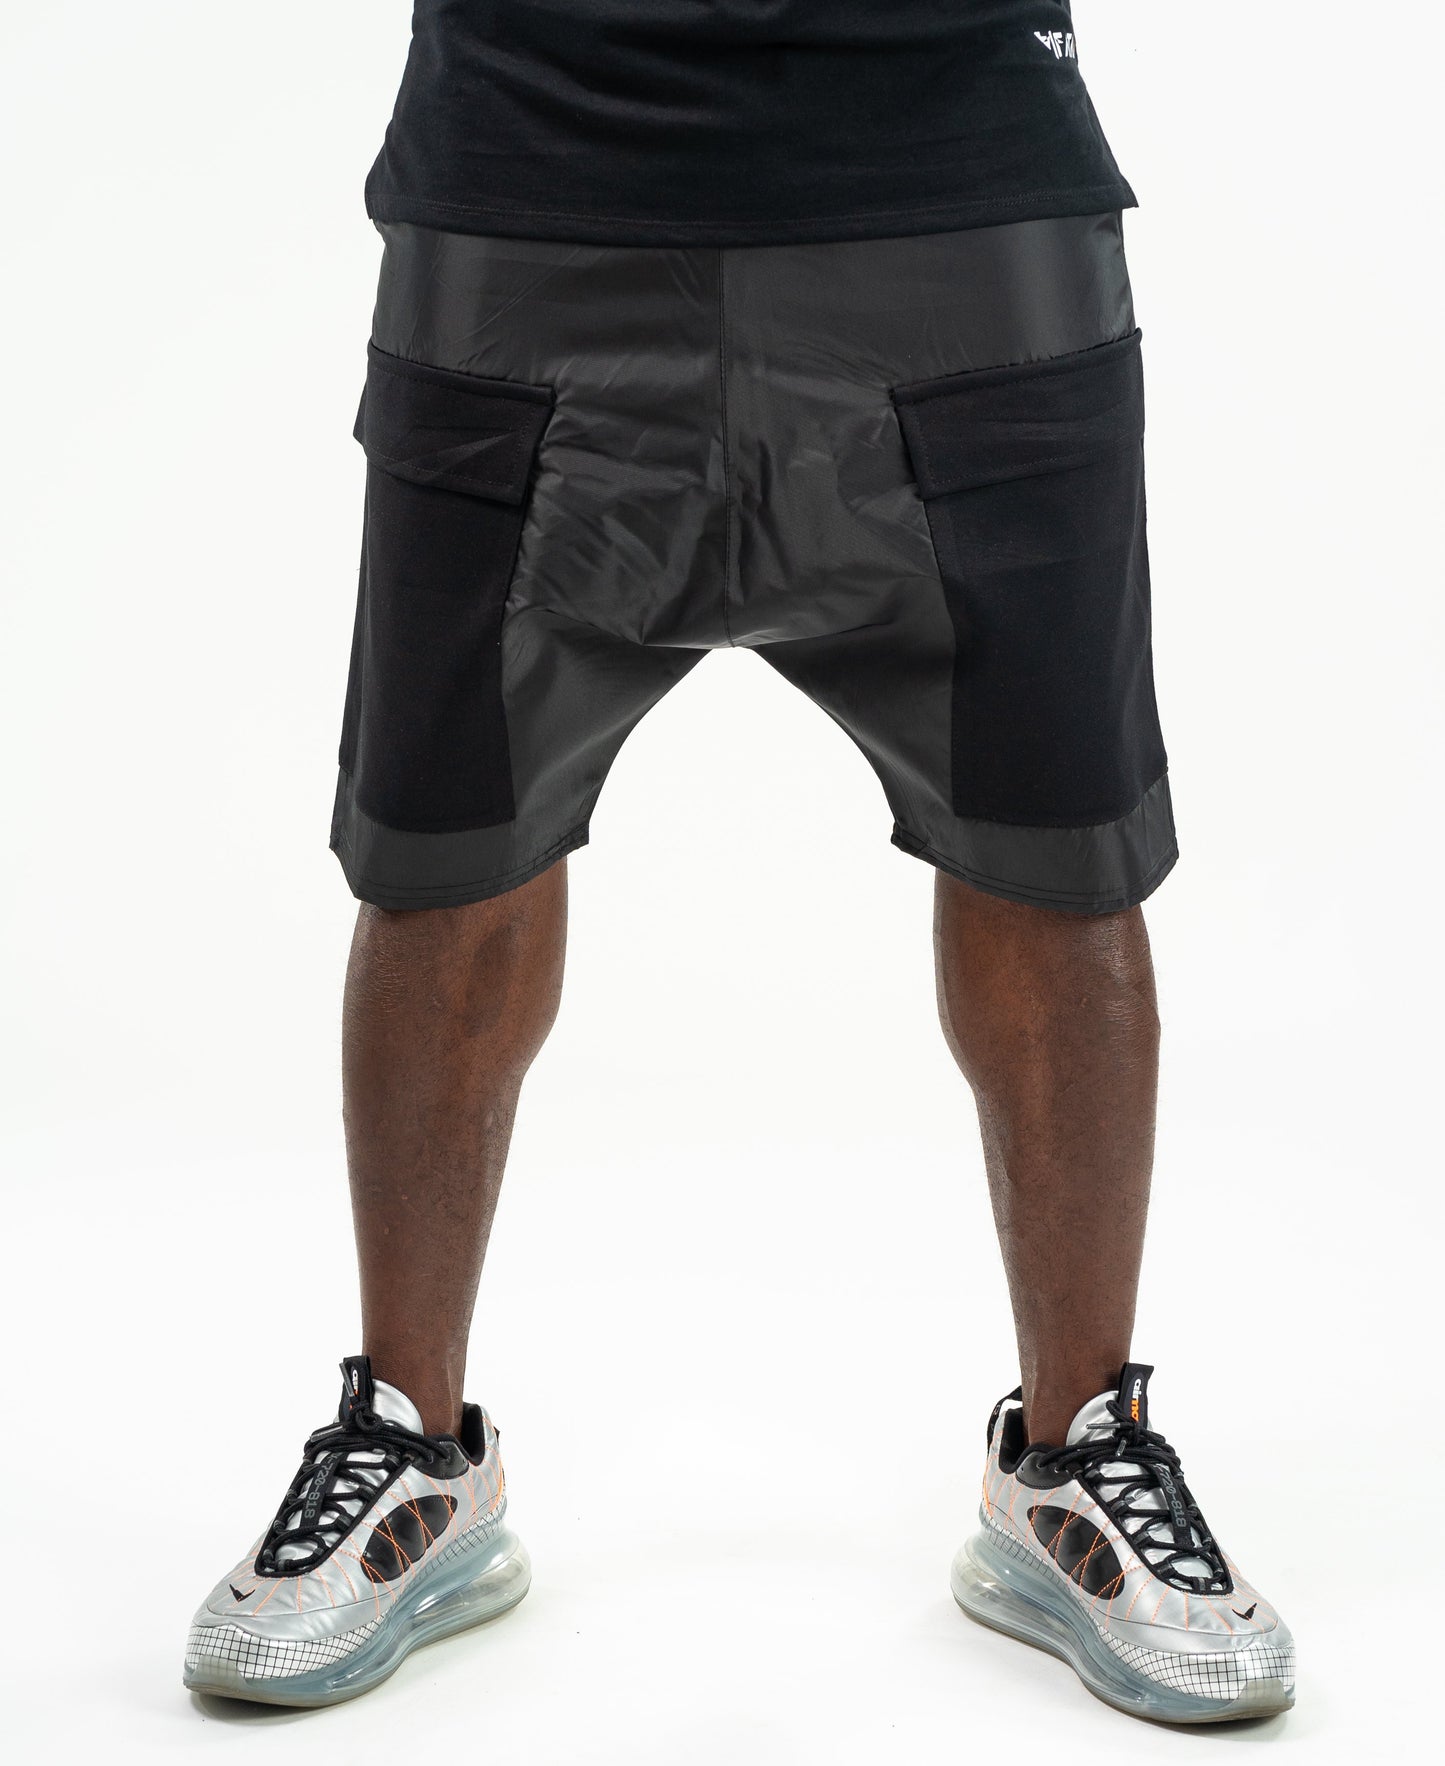 Short black trousers with black pockets - Fatai Style